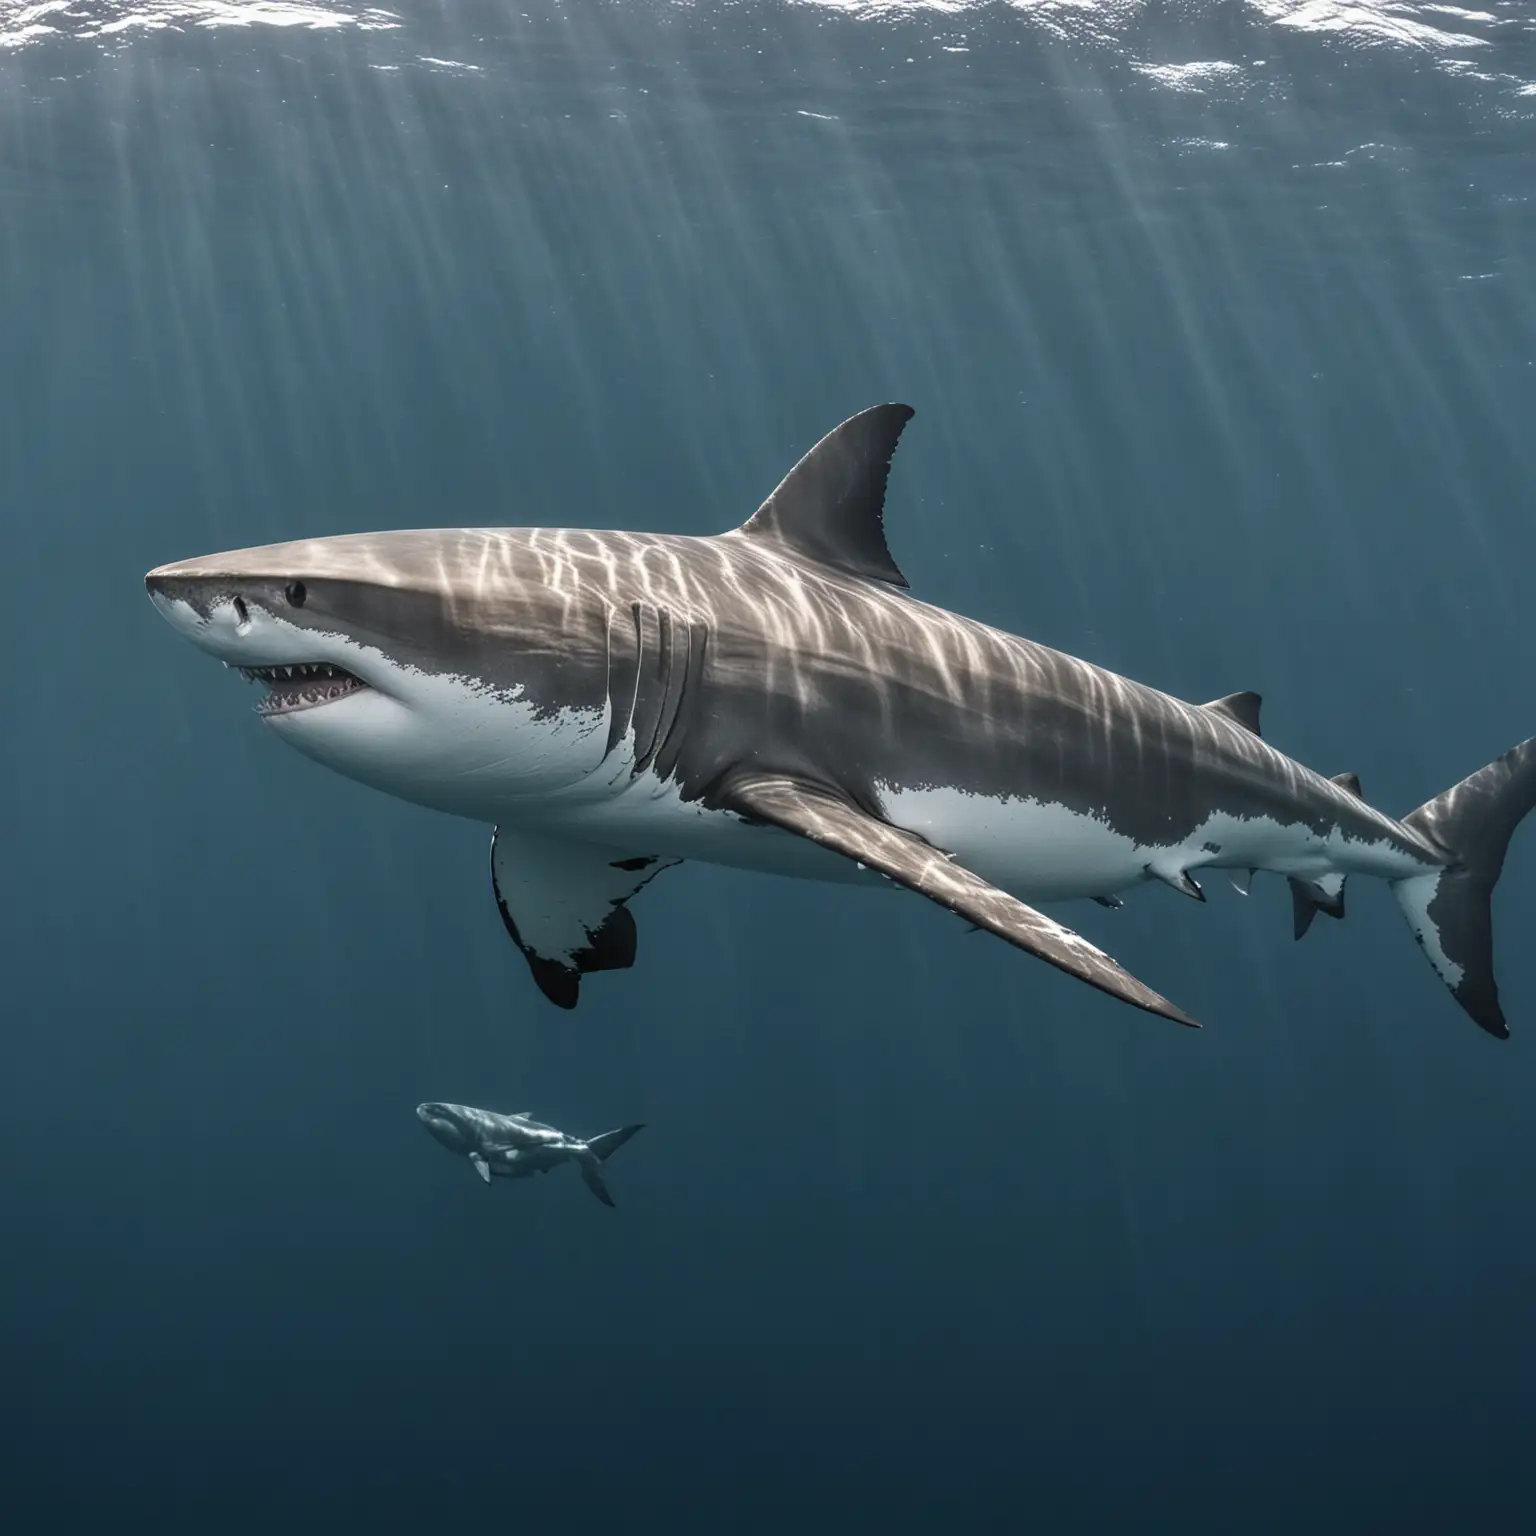 Majestic Great White Sharks Swimming in the Vast Ocean